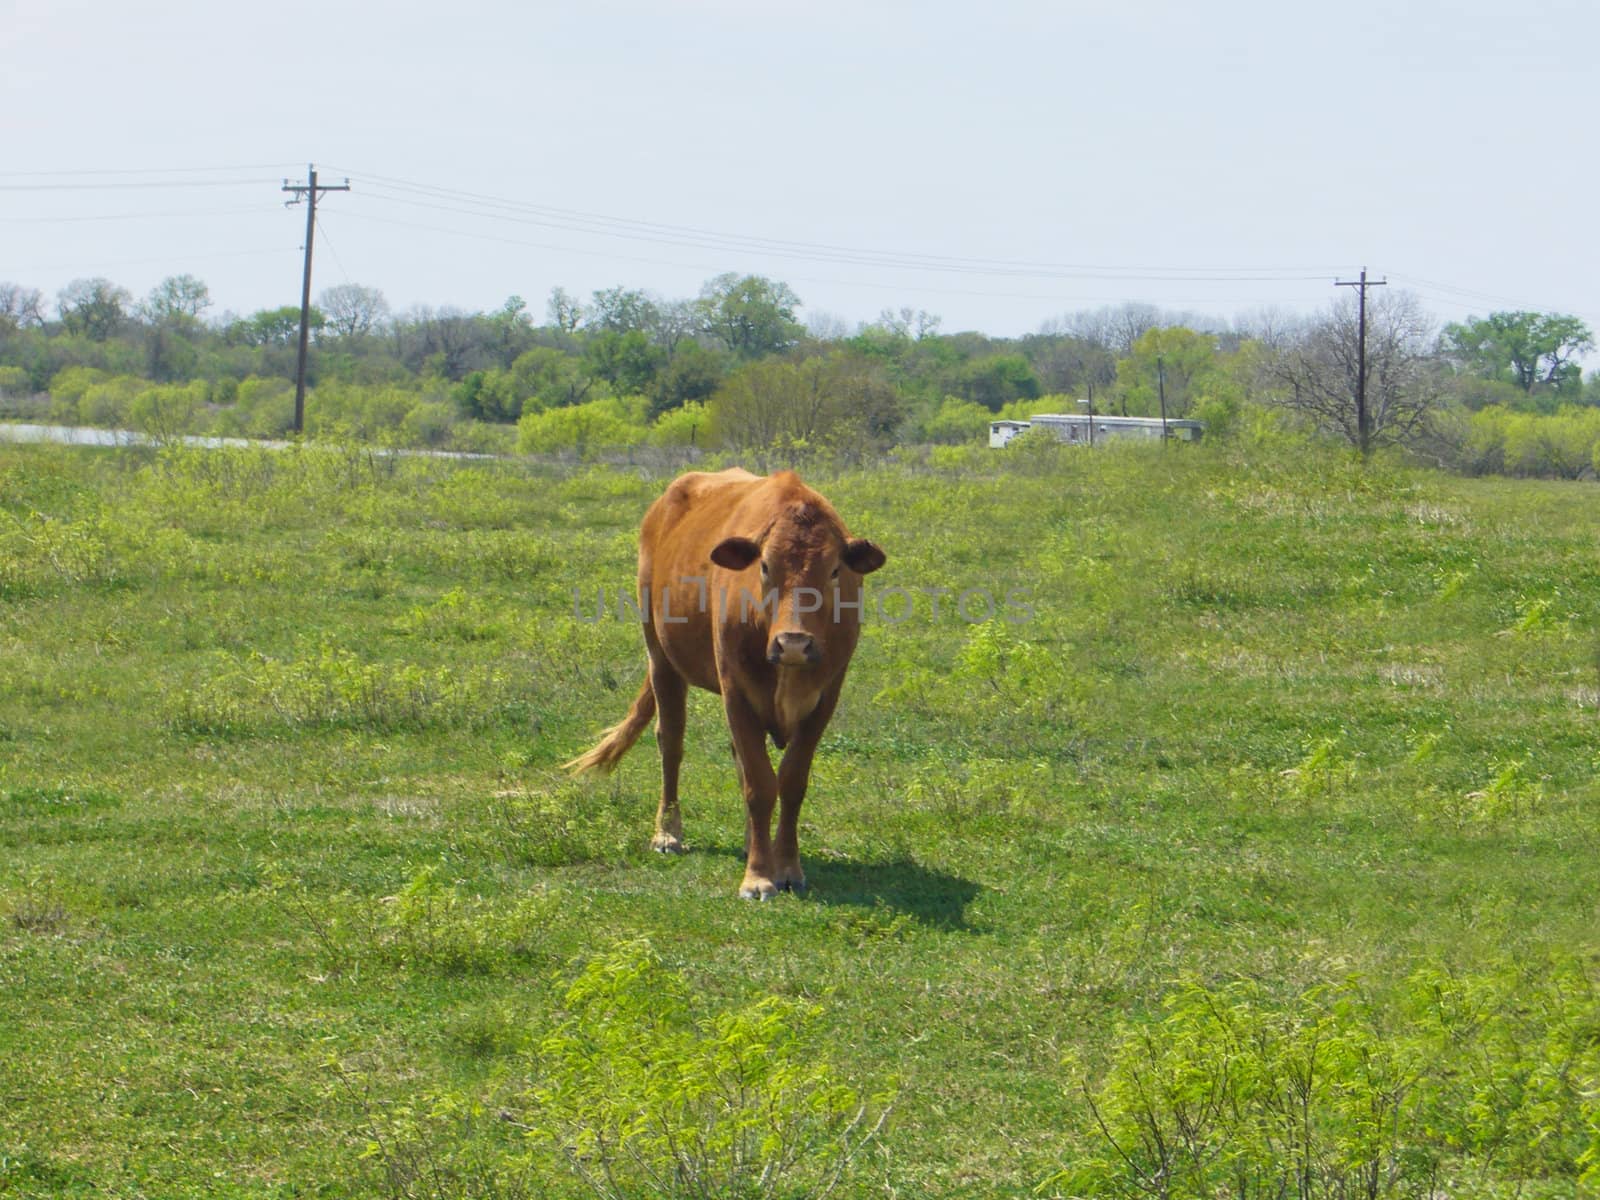 A lone cow out in a grassy field